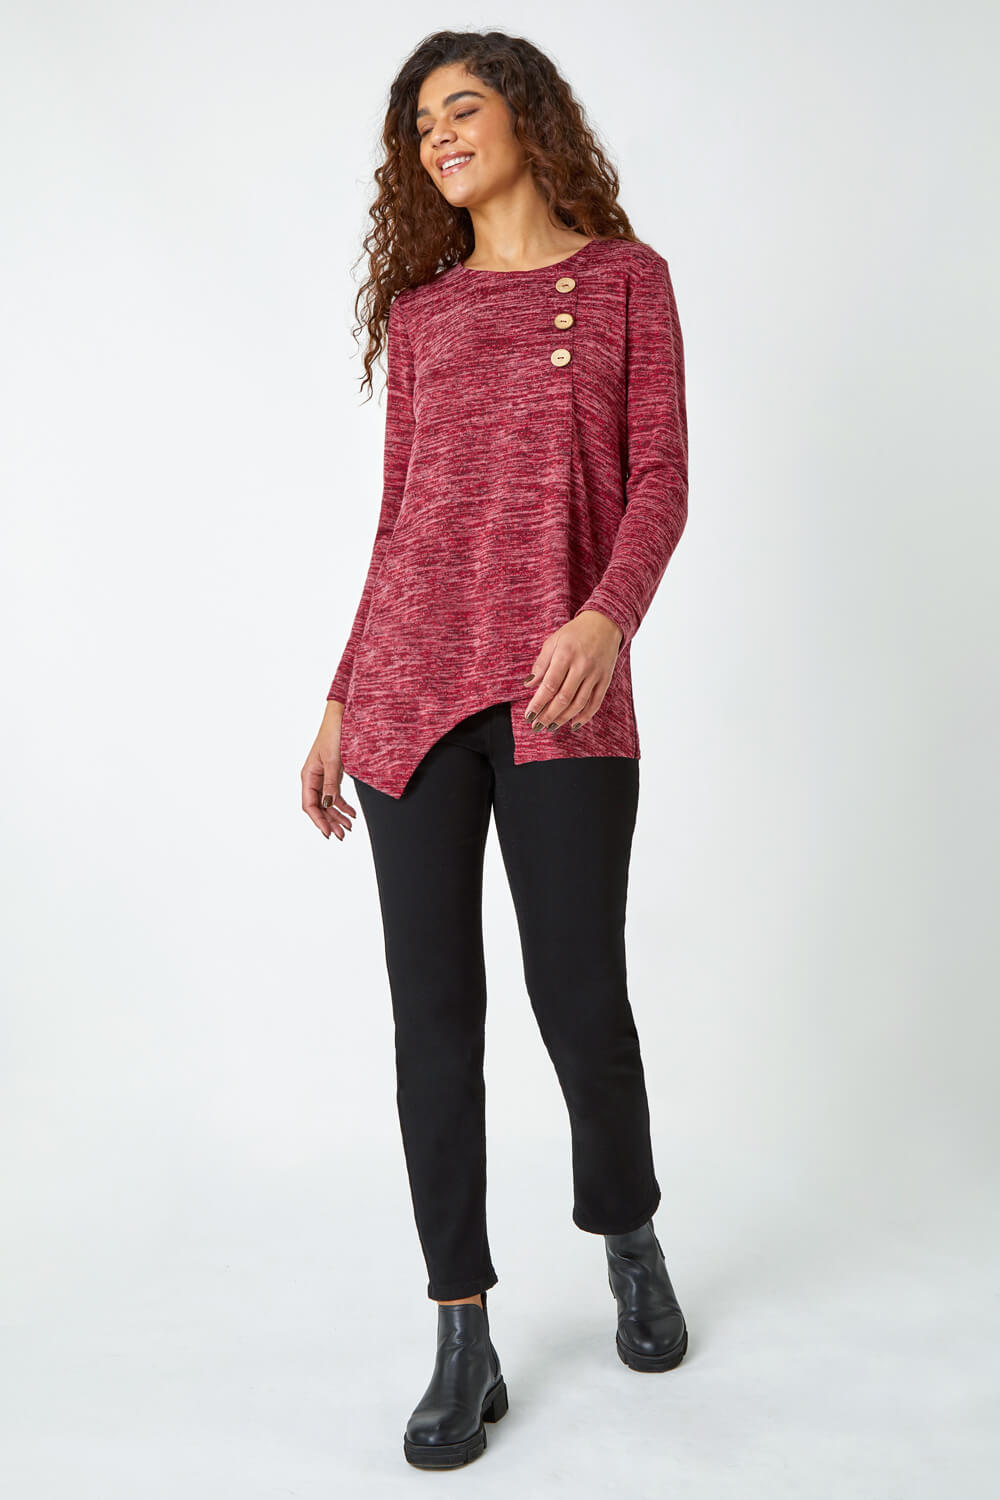 Maroon Button Stretch Knit Asymmetric Top, Image 2 of 5